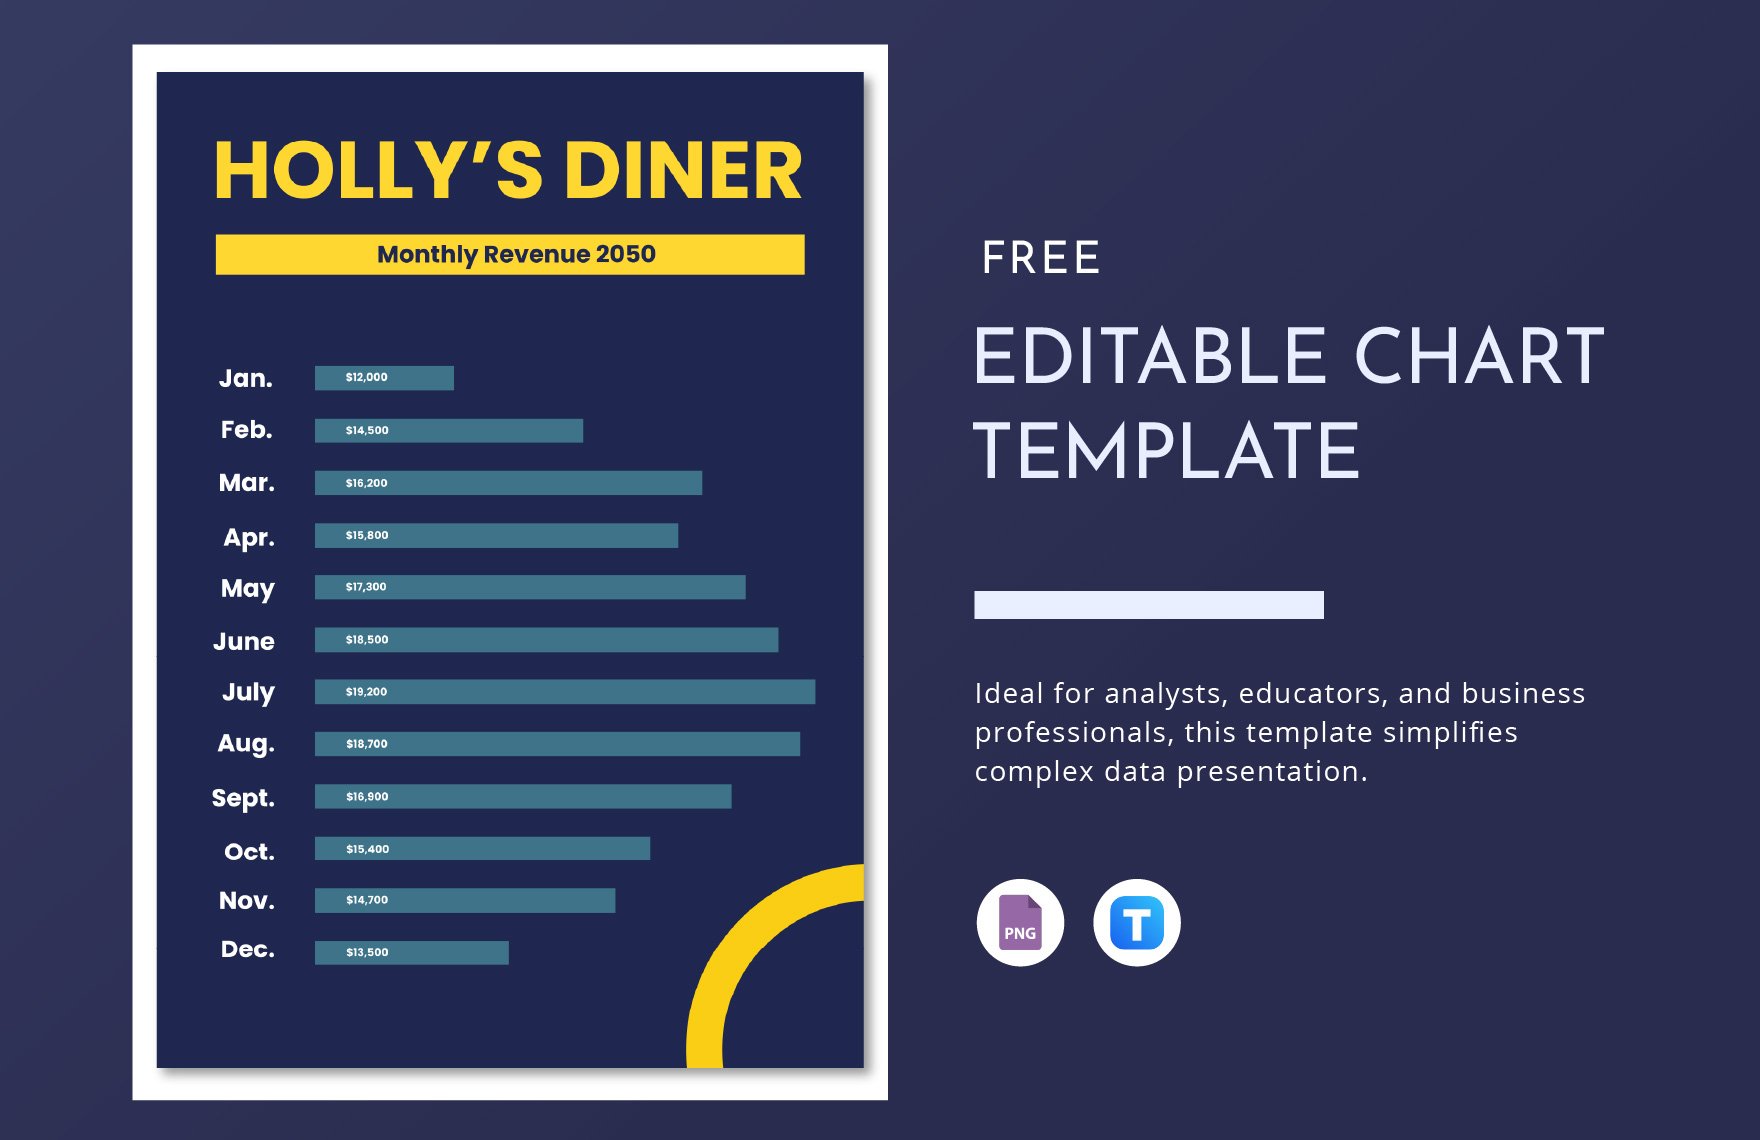 Free Editable Chart Template in PNG